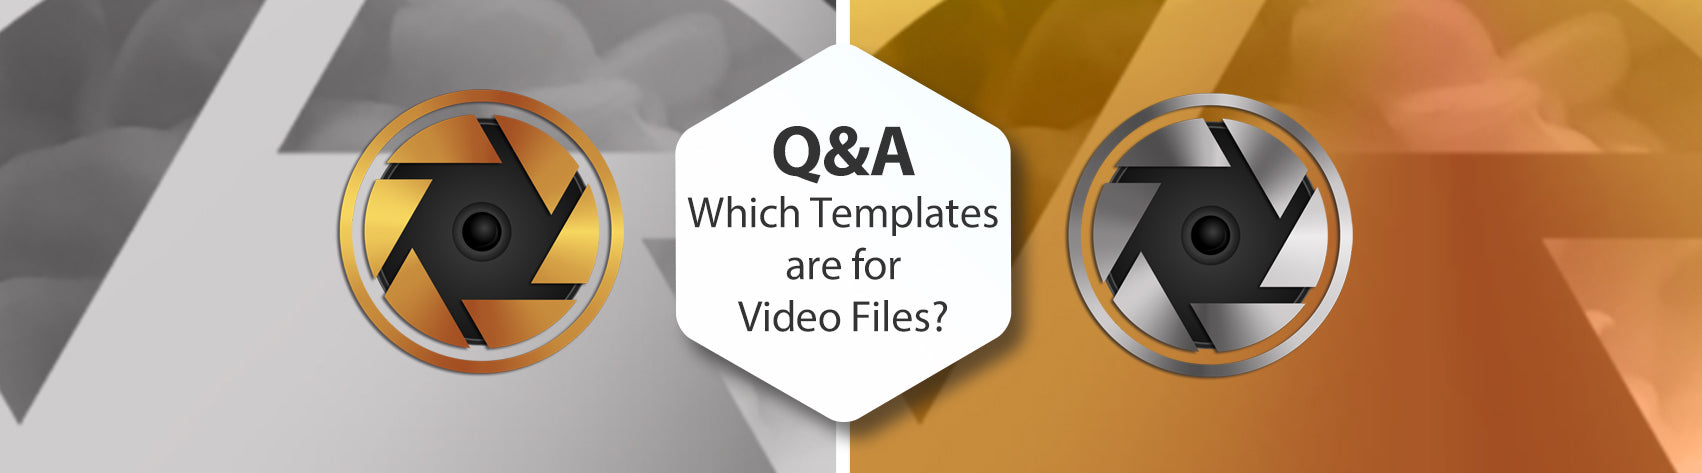 Q&A Which Templates Are For Video Files?